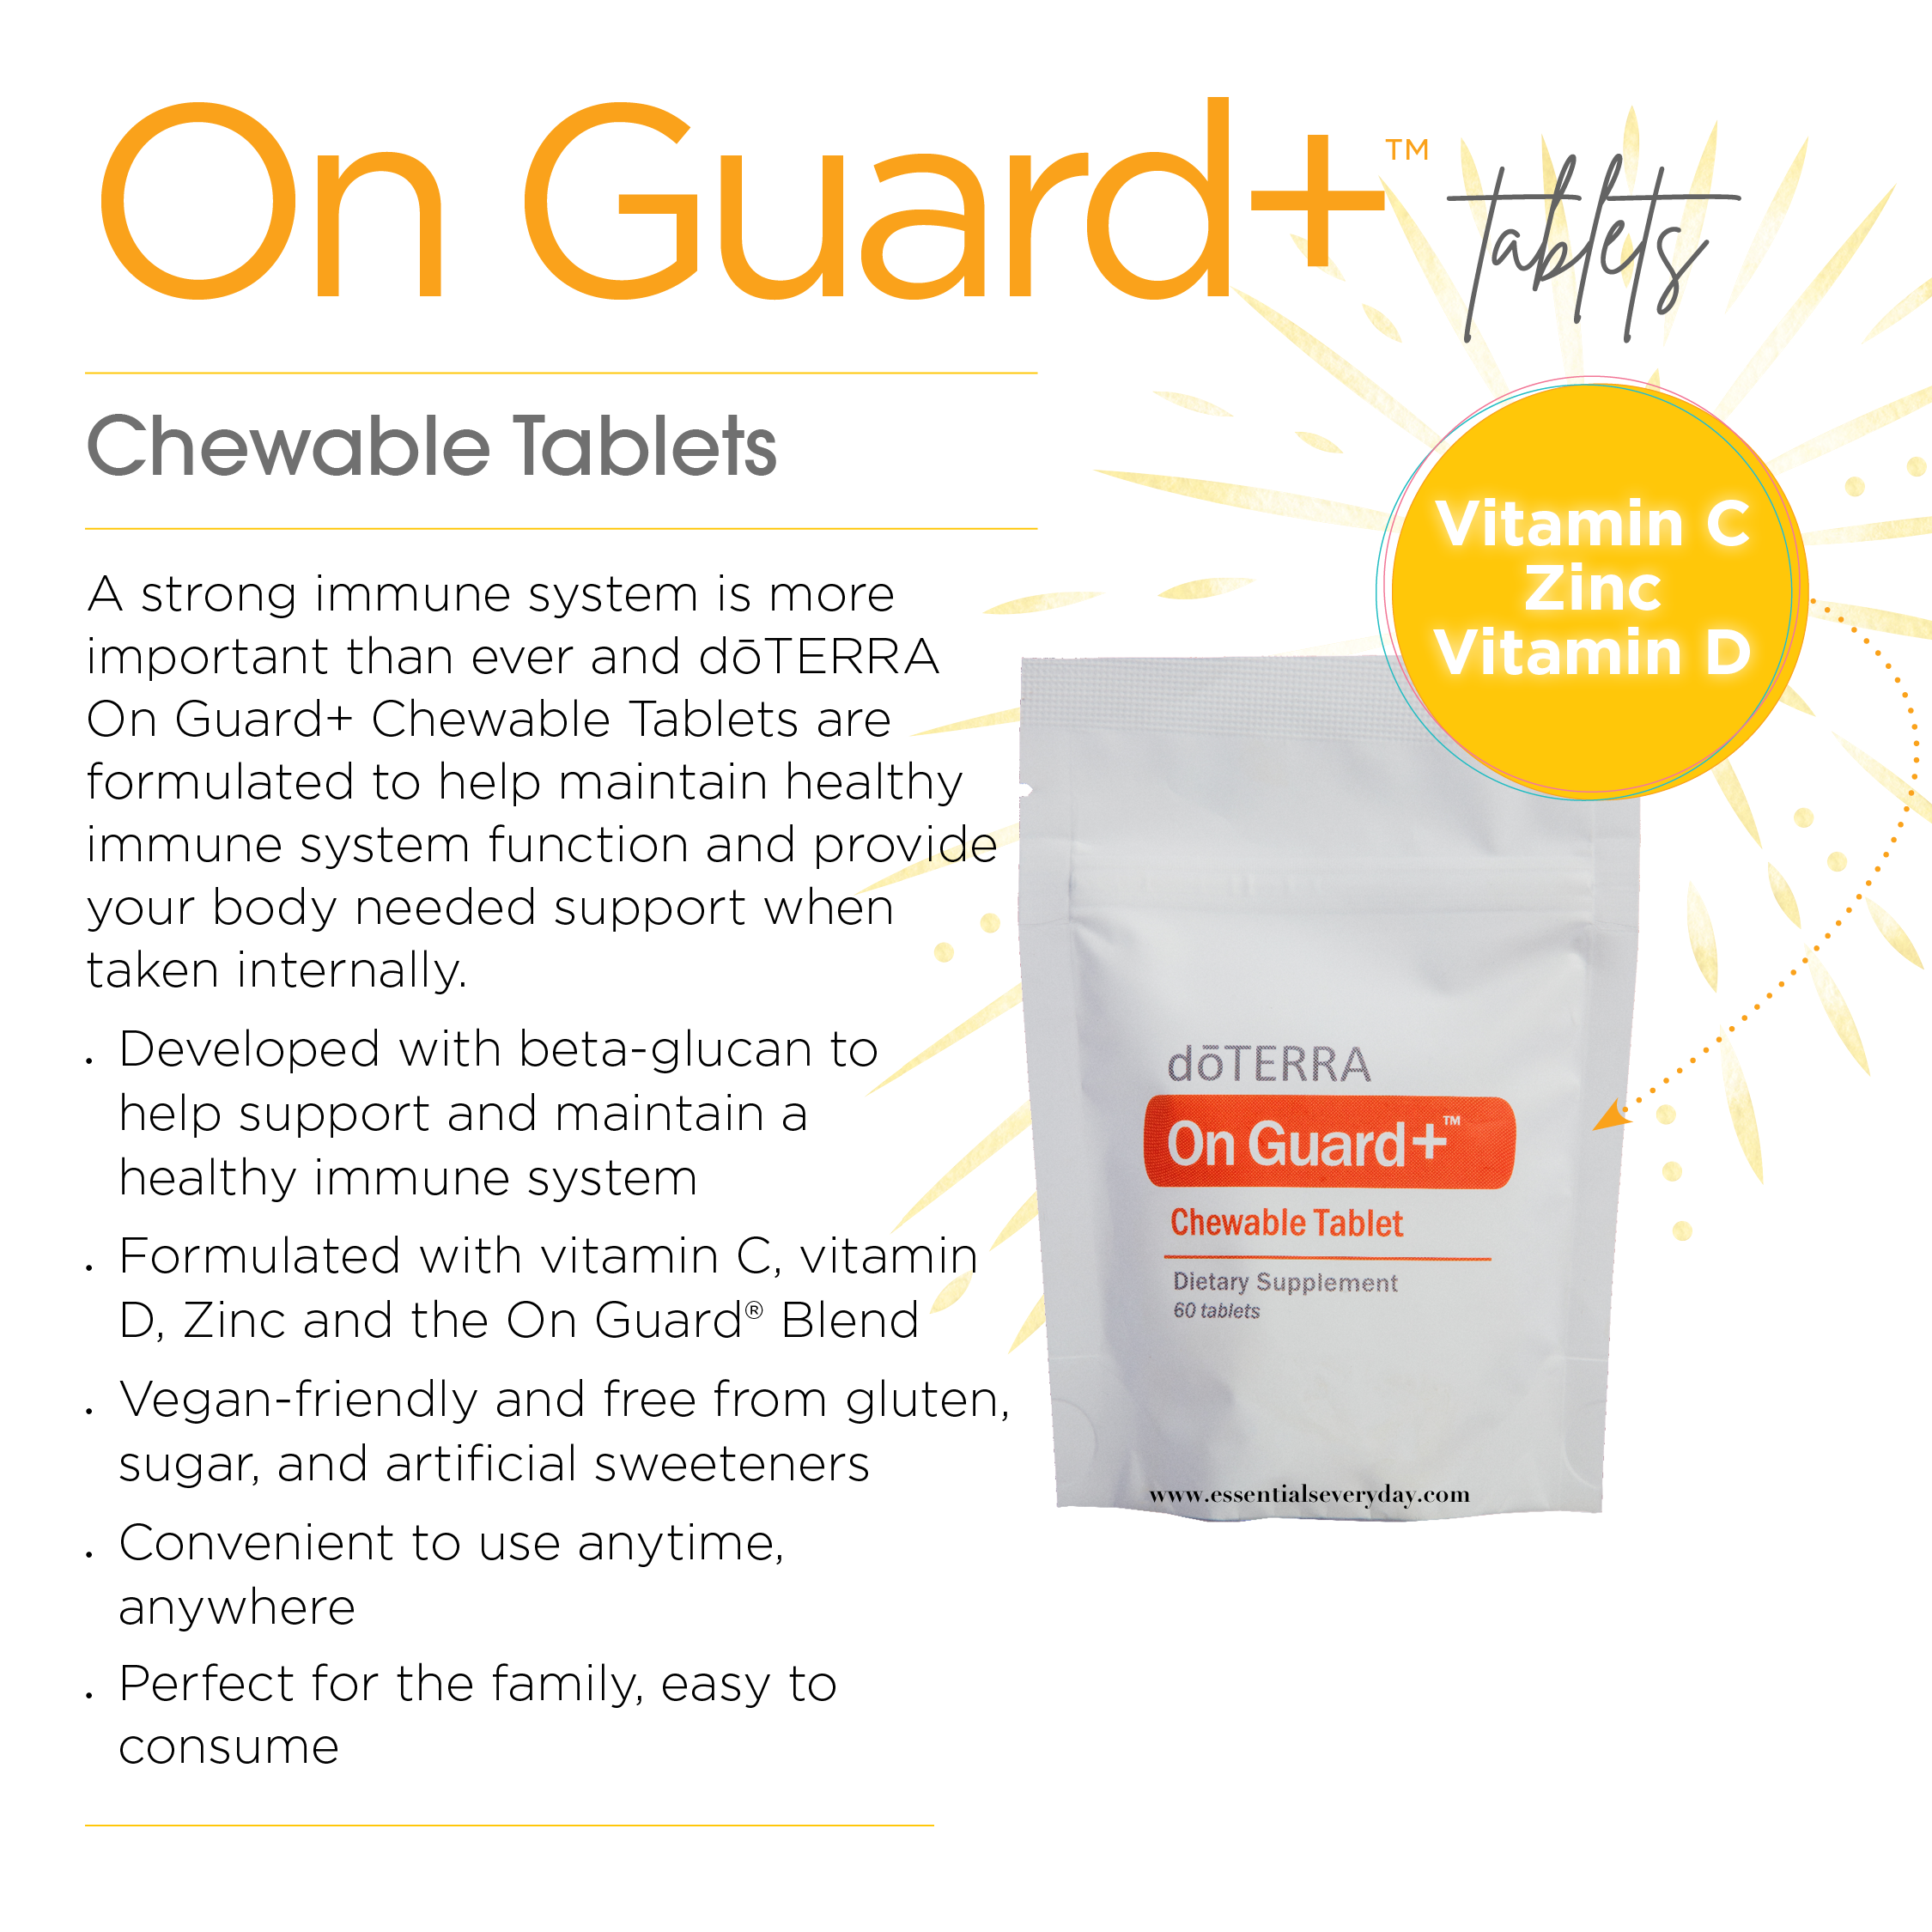 on guard tablets-406-193012.png